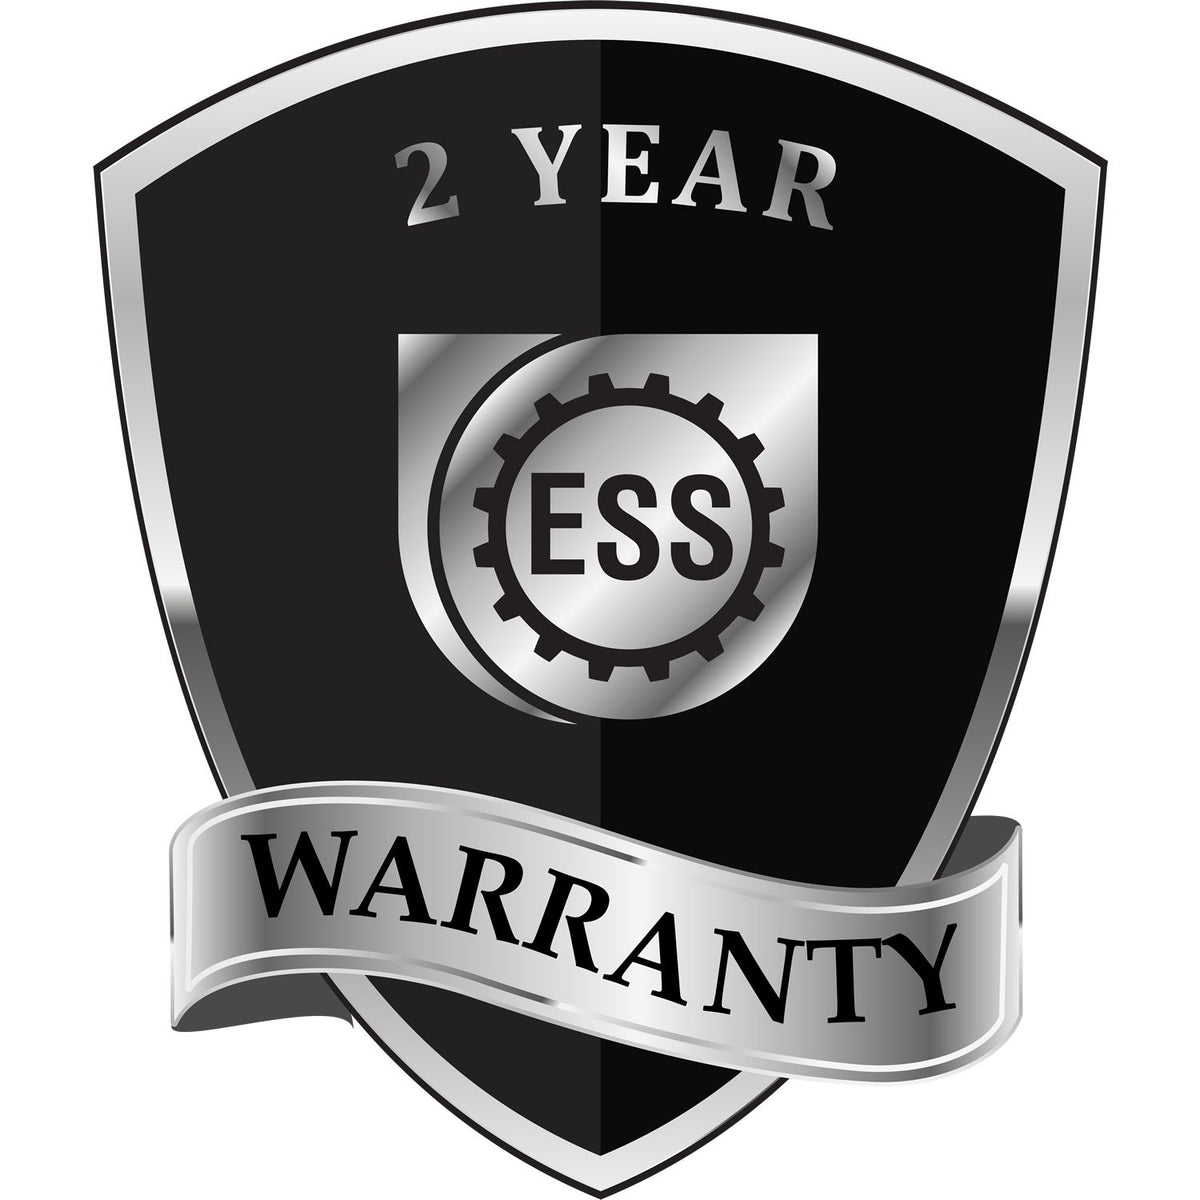 A badge or emblem showing a warranty icon for the Heavy Duty Cast Iron Georgia Engineer Seal Embosser